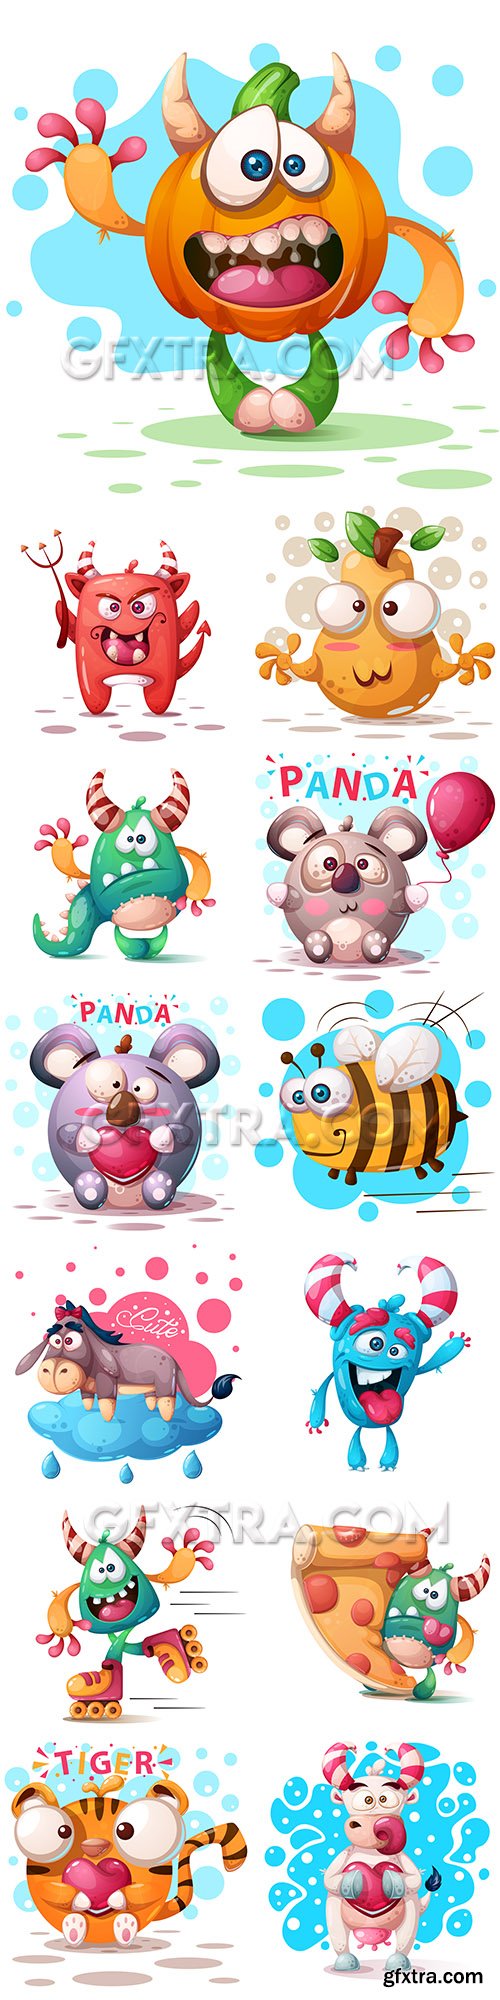 Monsters and funny cartoon characters vector illustration